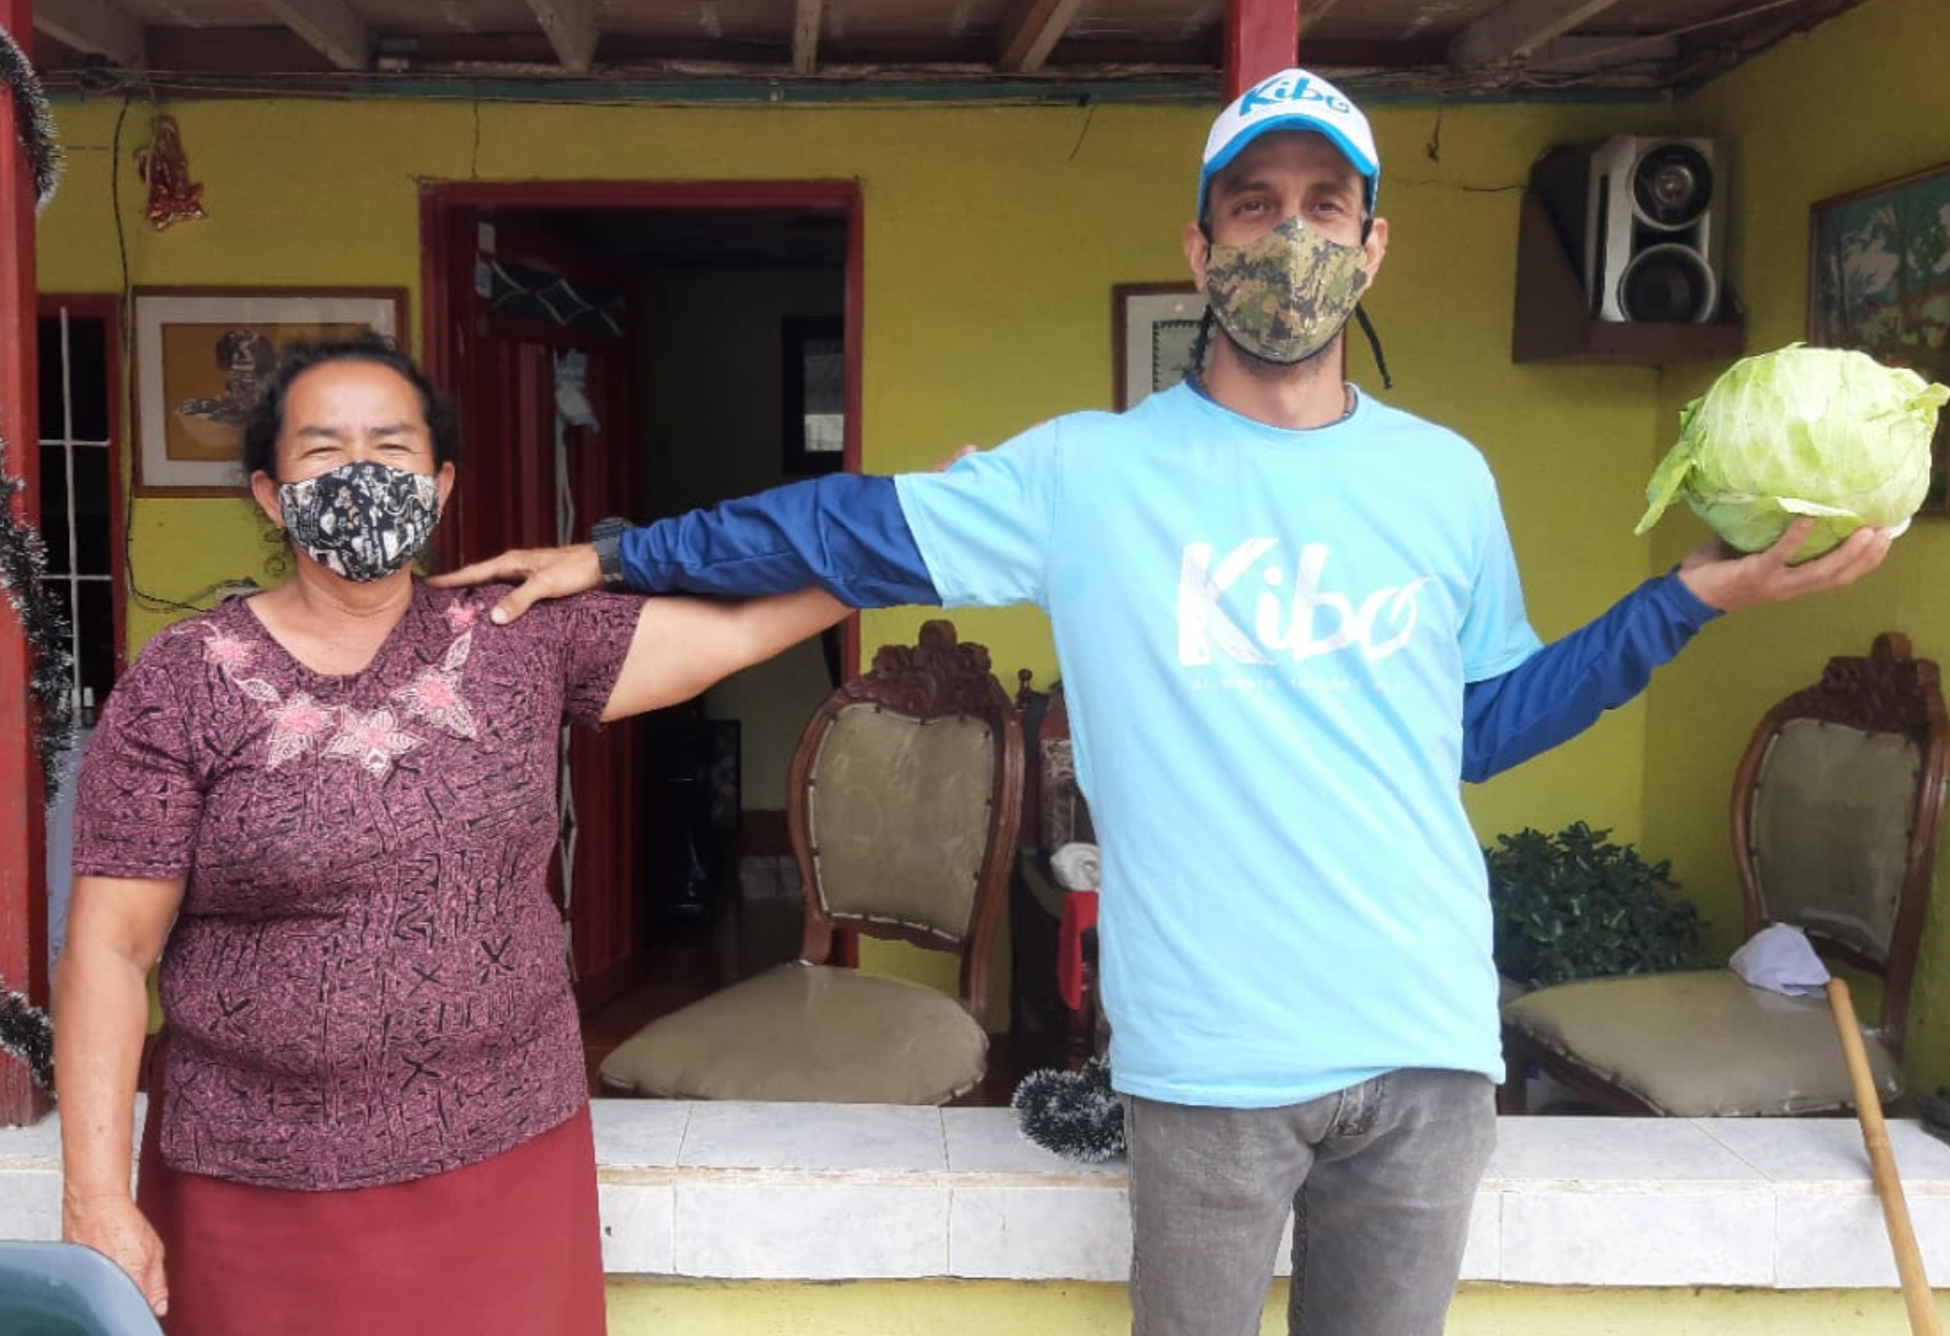 Kibo X Germinar:  How Our Partner Program Is Helping Families in Colombia Harness the Power of Plants